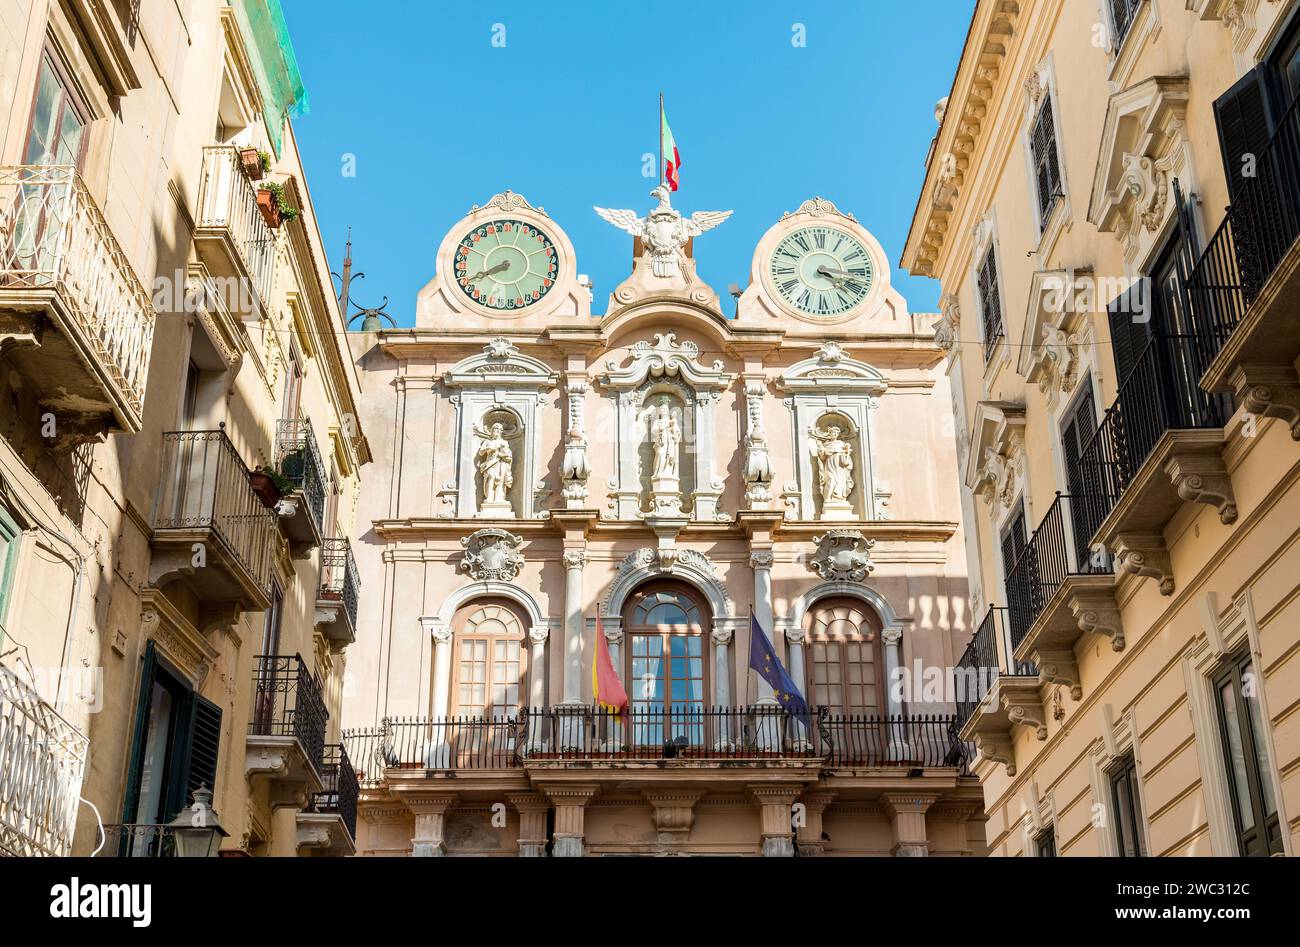 Senatorial Palace or Cavarretta palace is historic building in center of Trapani, Sicily, Italy Stock Photo